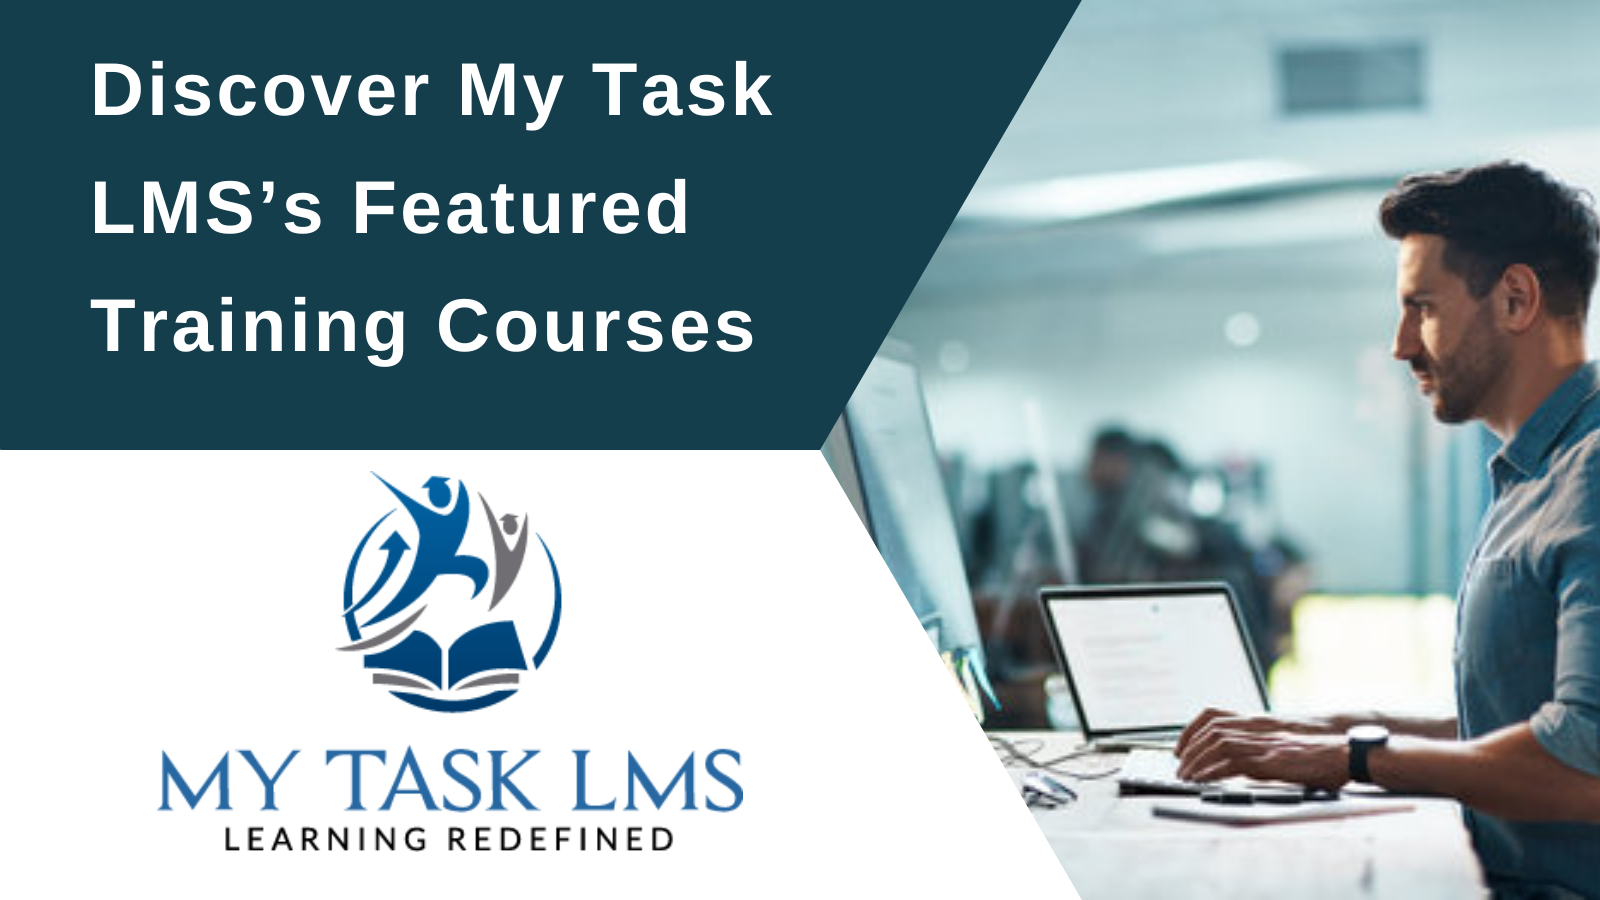 Discover My Task LMS’s Featured Training Courses